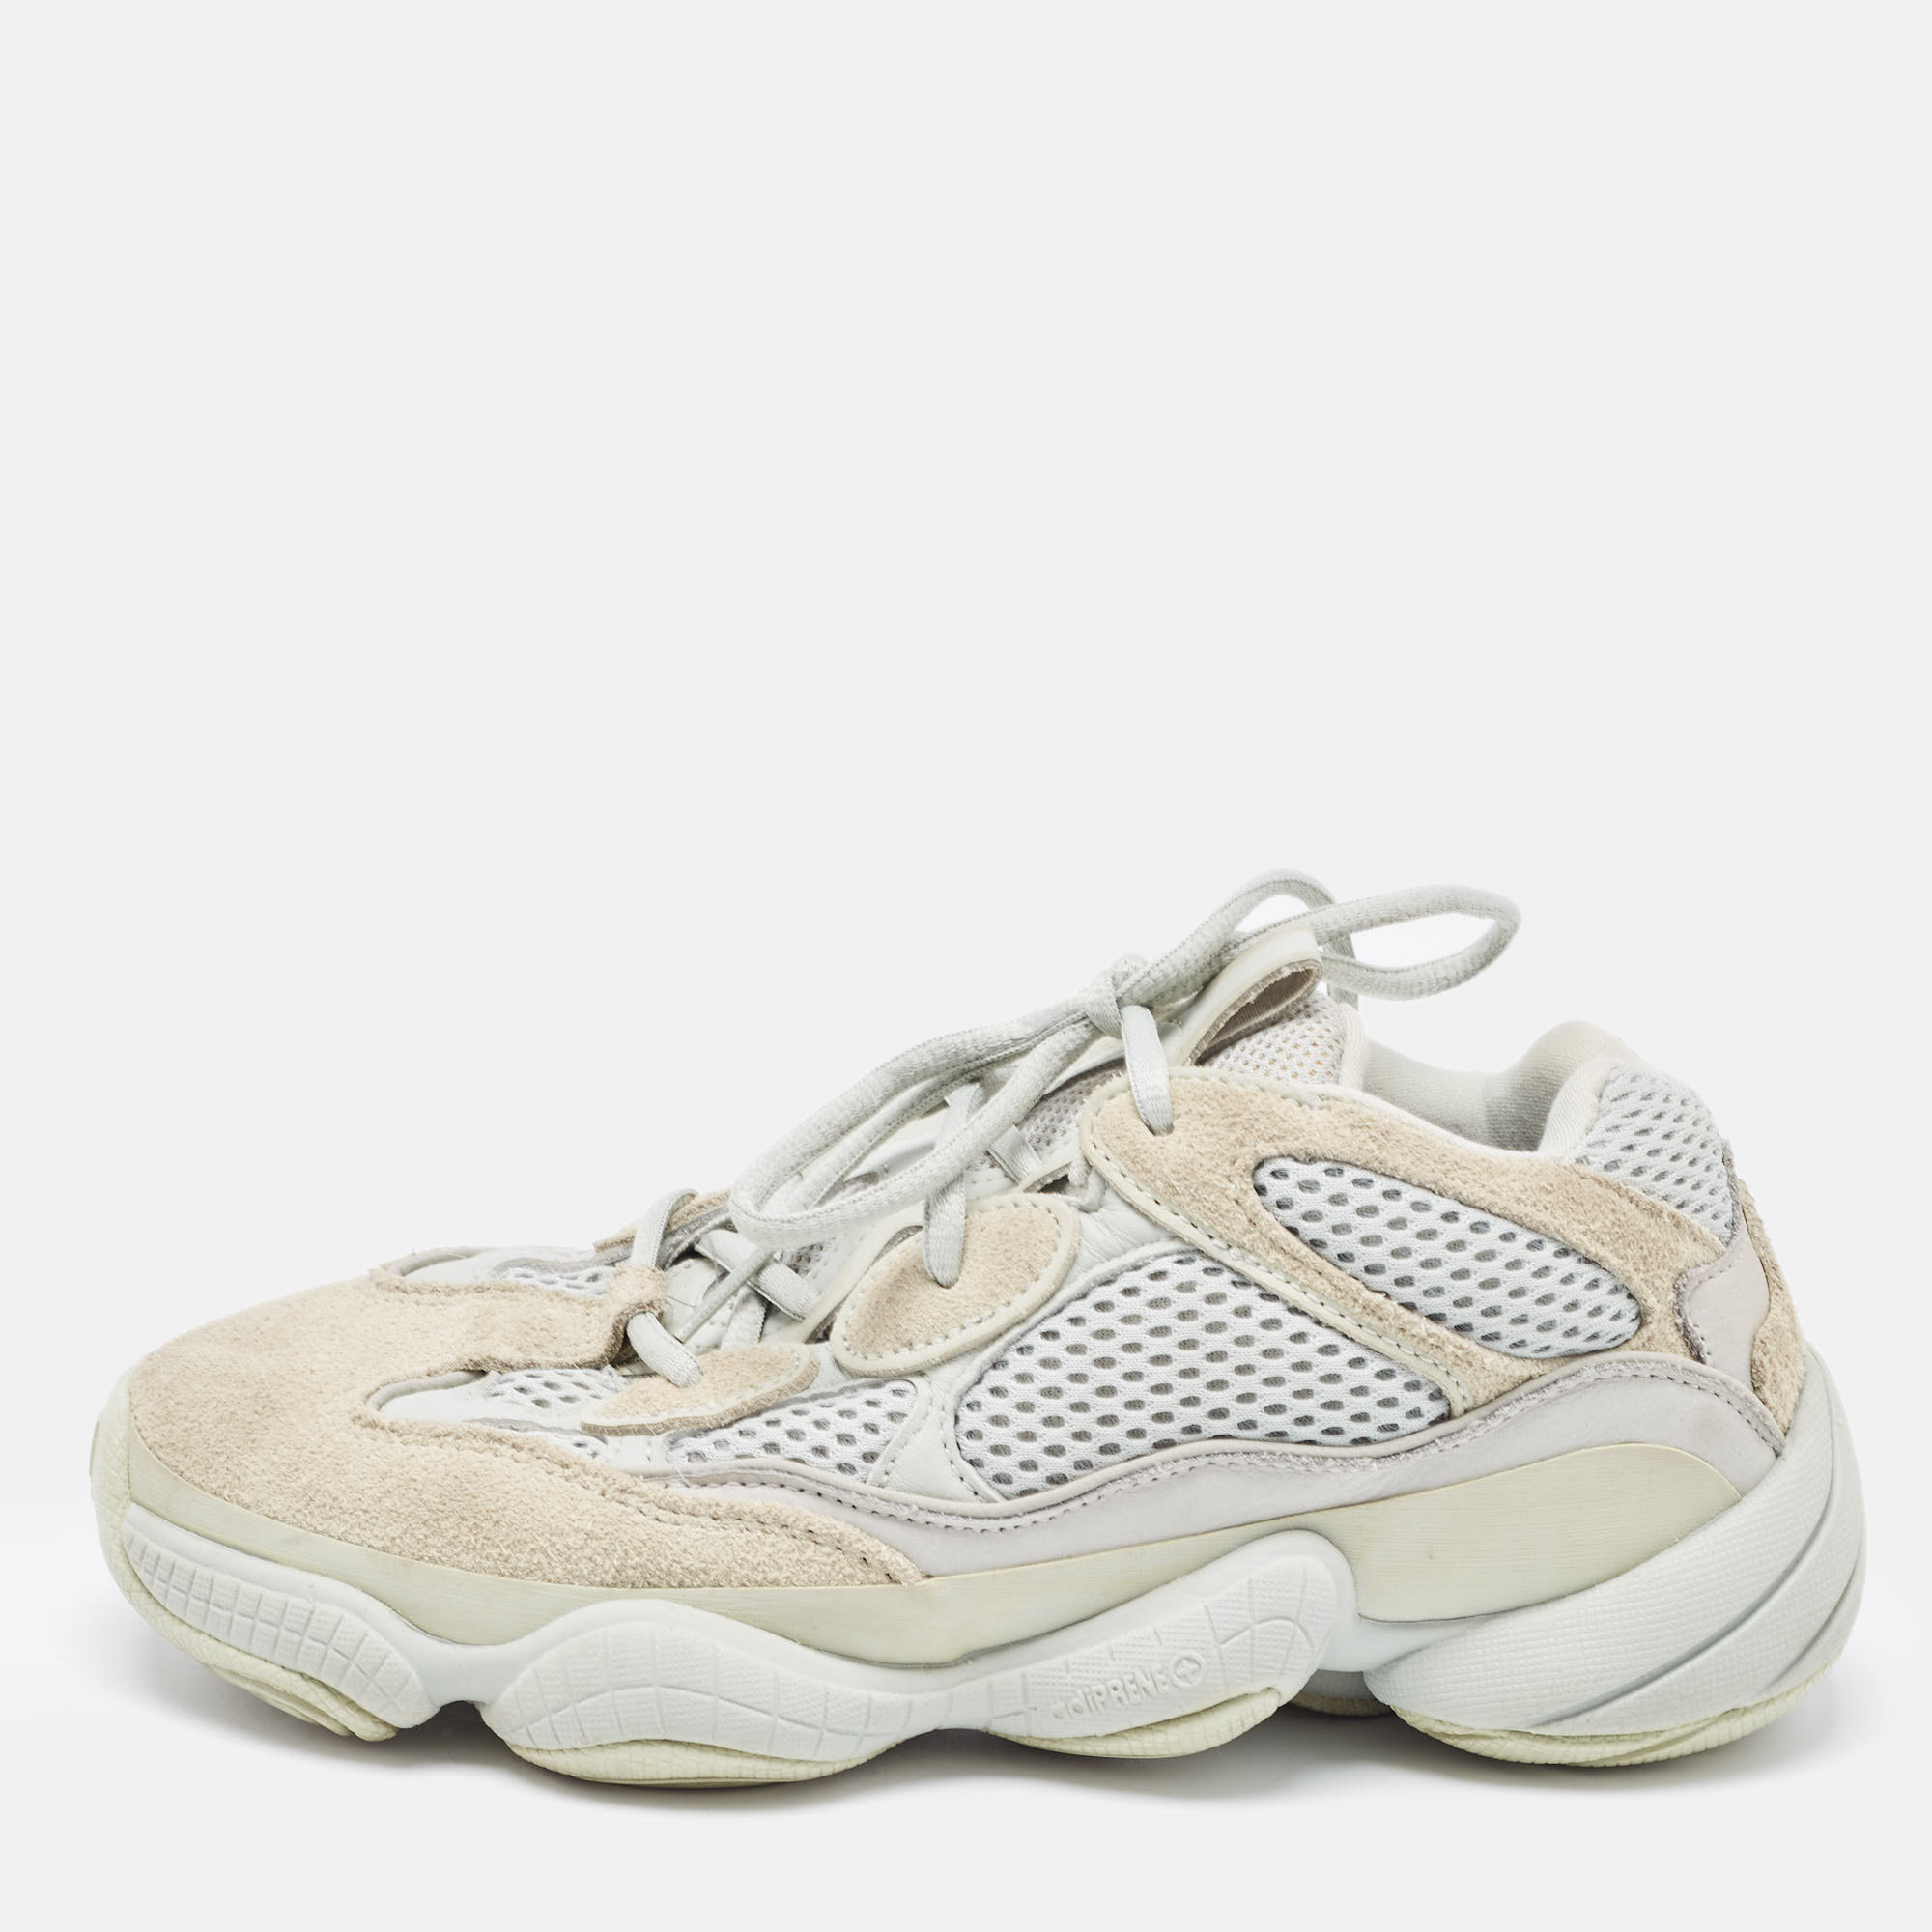 Pre-owned Yeezy X Adidas Two Tone Suede And Mesh Yeezy 500 Salt Trainers Size 38 In Green